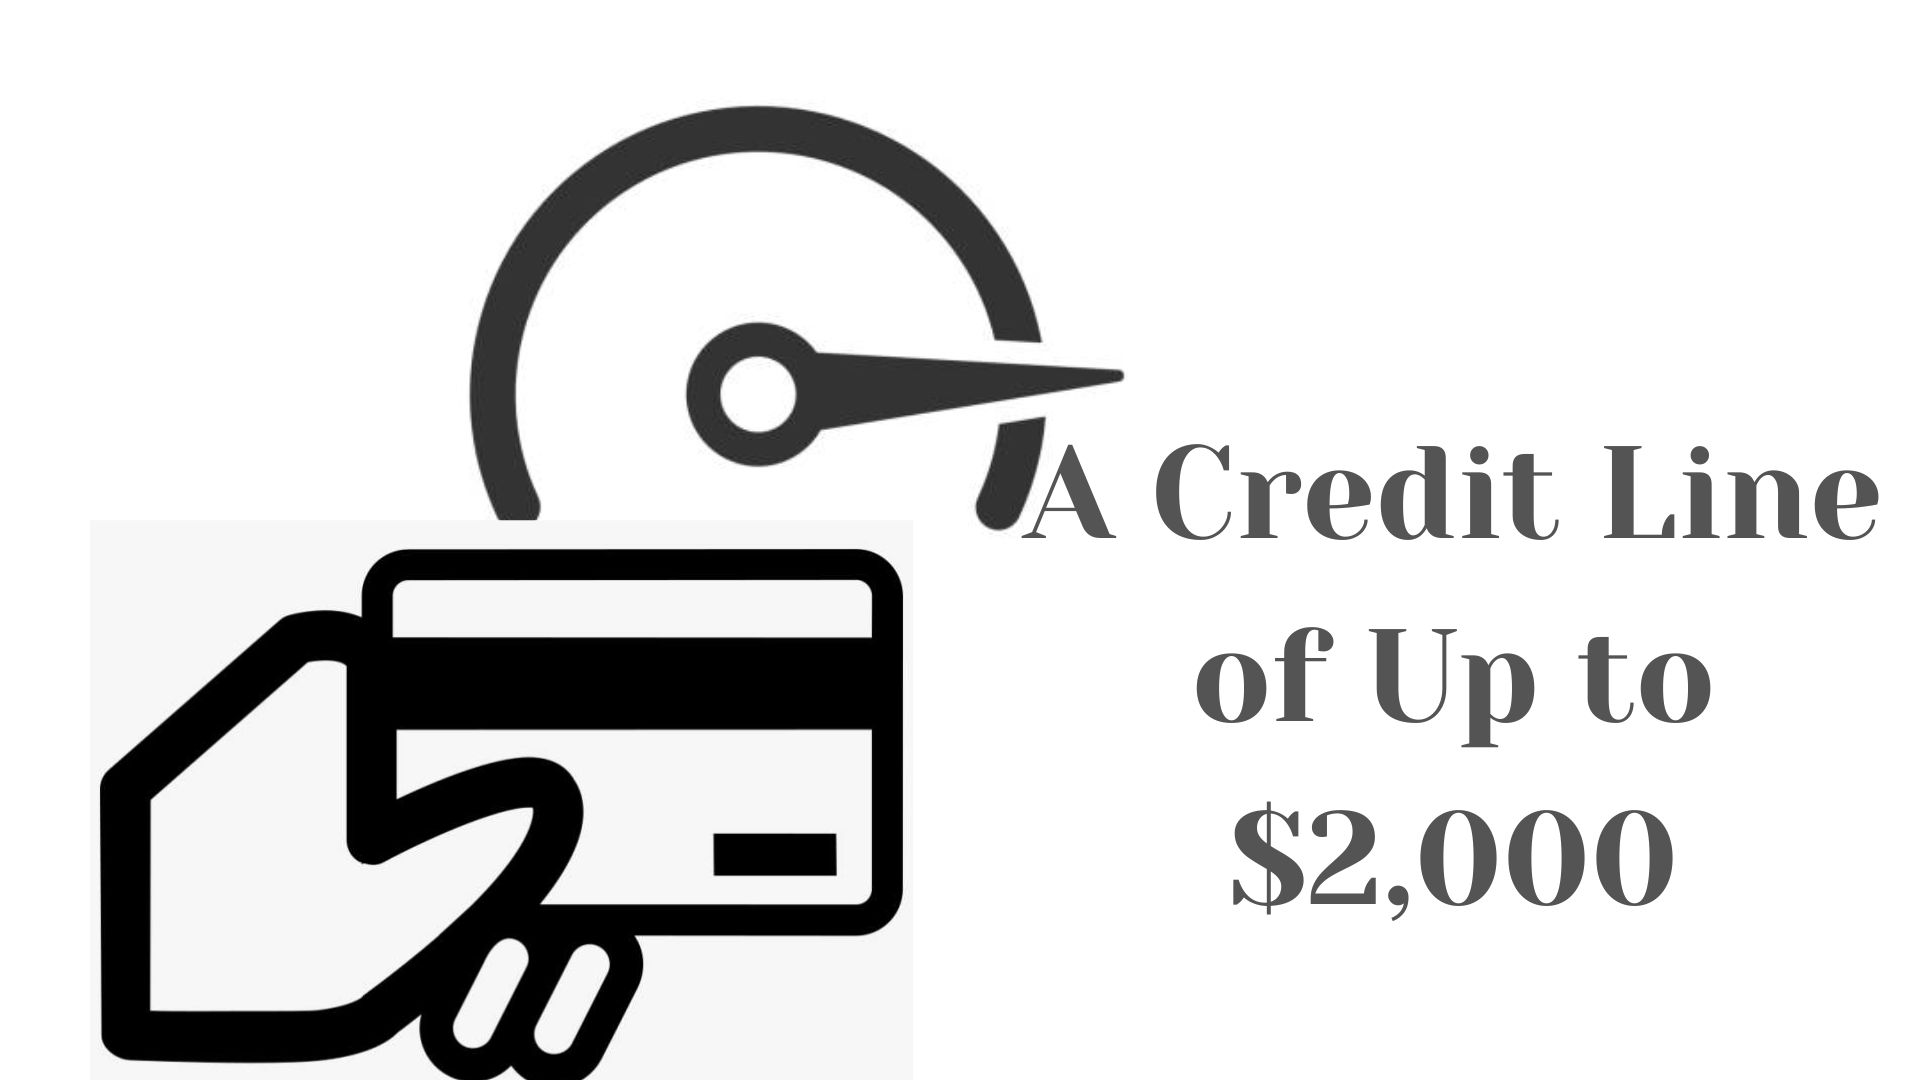 A Credit Line of Up to $2,000